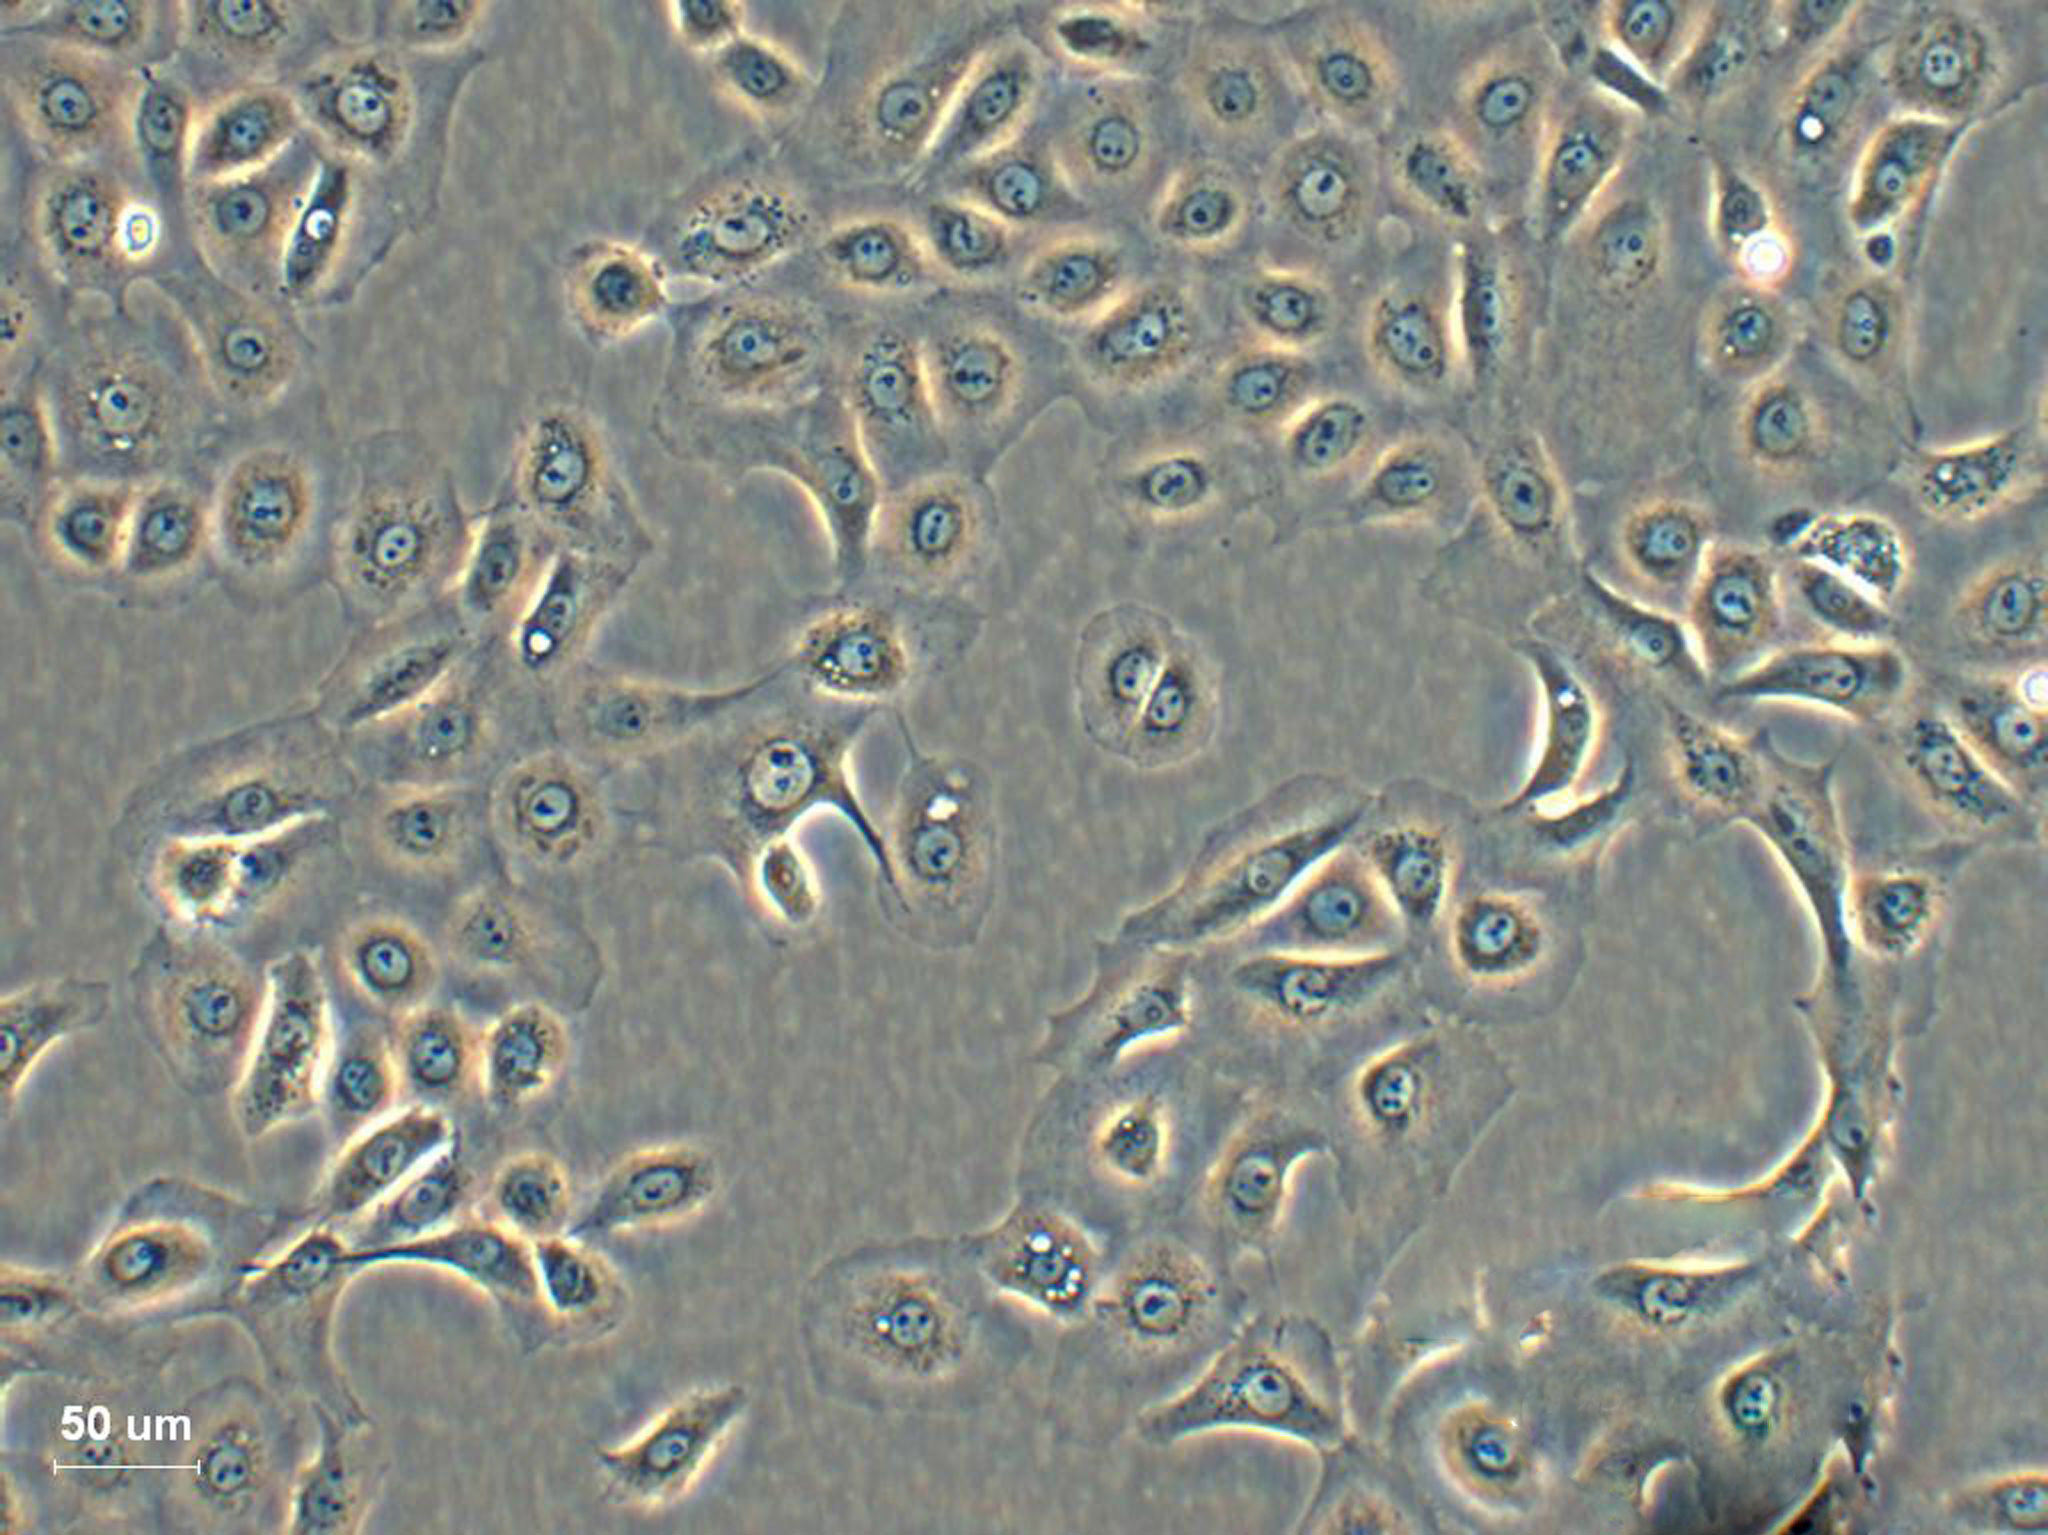 SW839 cell line人肾癌细胞系,SW839 cell line